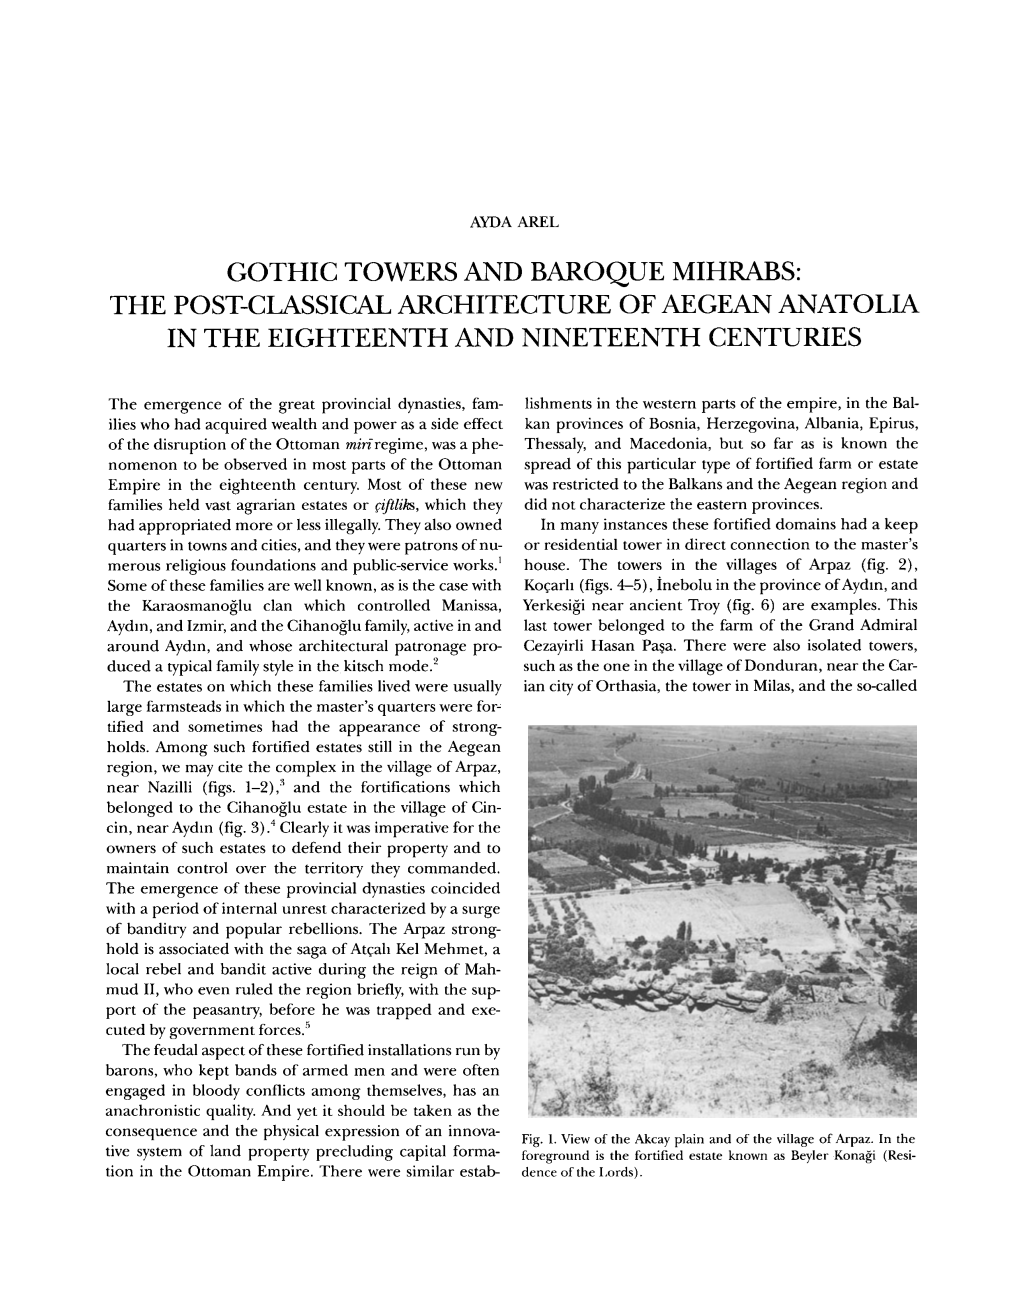 Gothic Towers and Baroque Mihrabs: the Post-Classical Architecture of Aegean Anatolia in the Eighteenth and Nineteenth Centuries